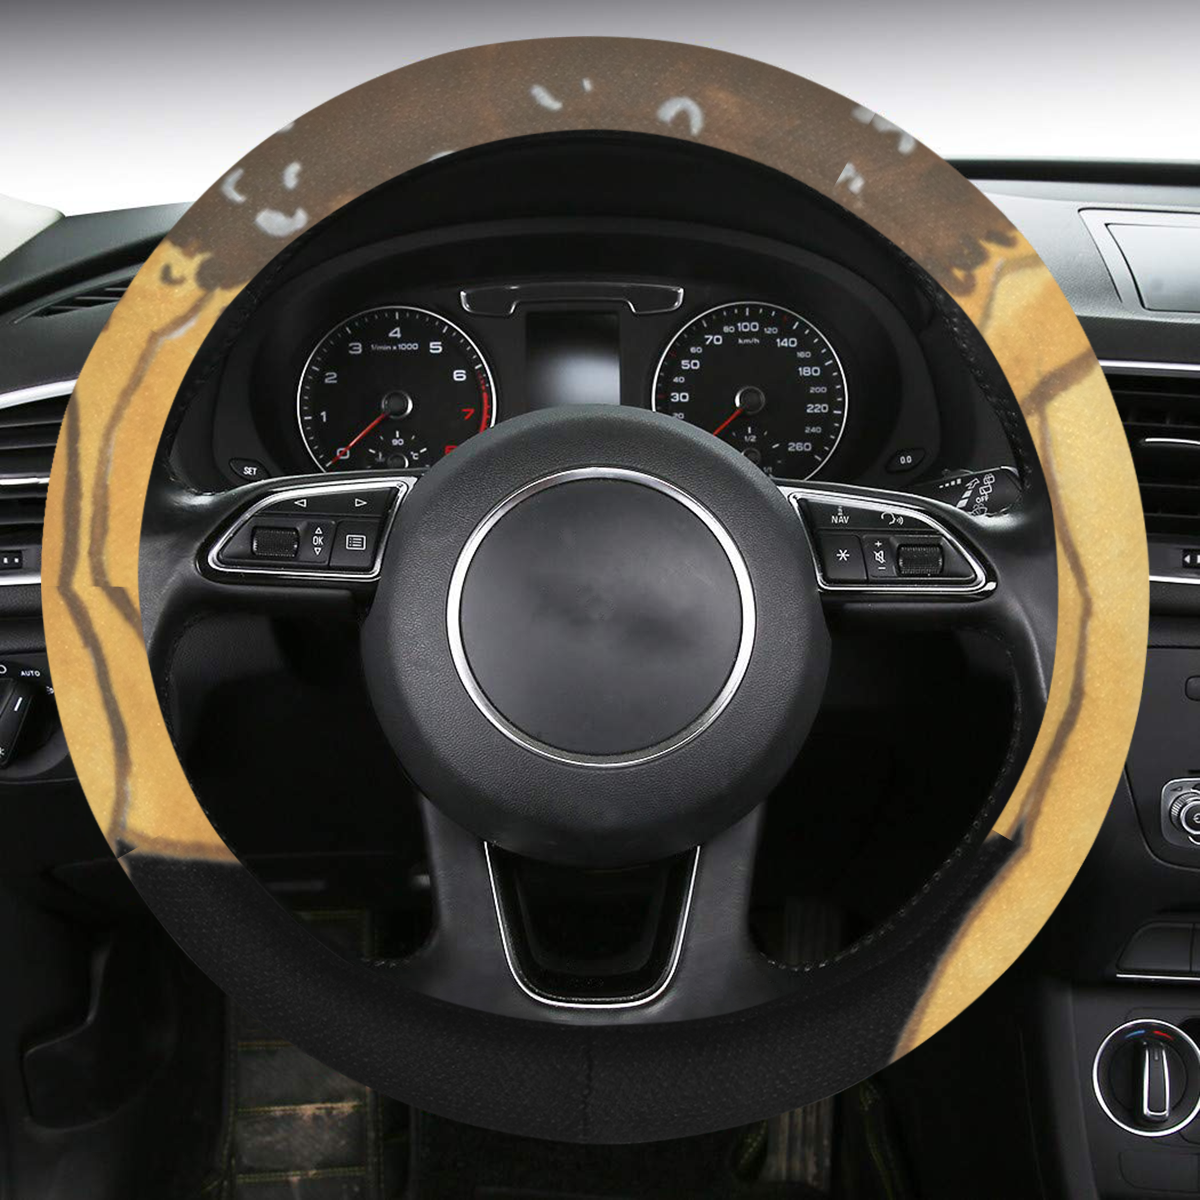 LG Sunflower Steering Wheel Cover With Anti Slip Insert Steering Wheel Cover with Anti-Slip Insert